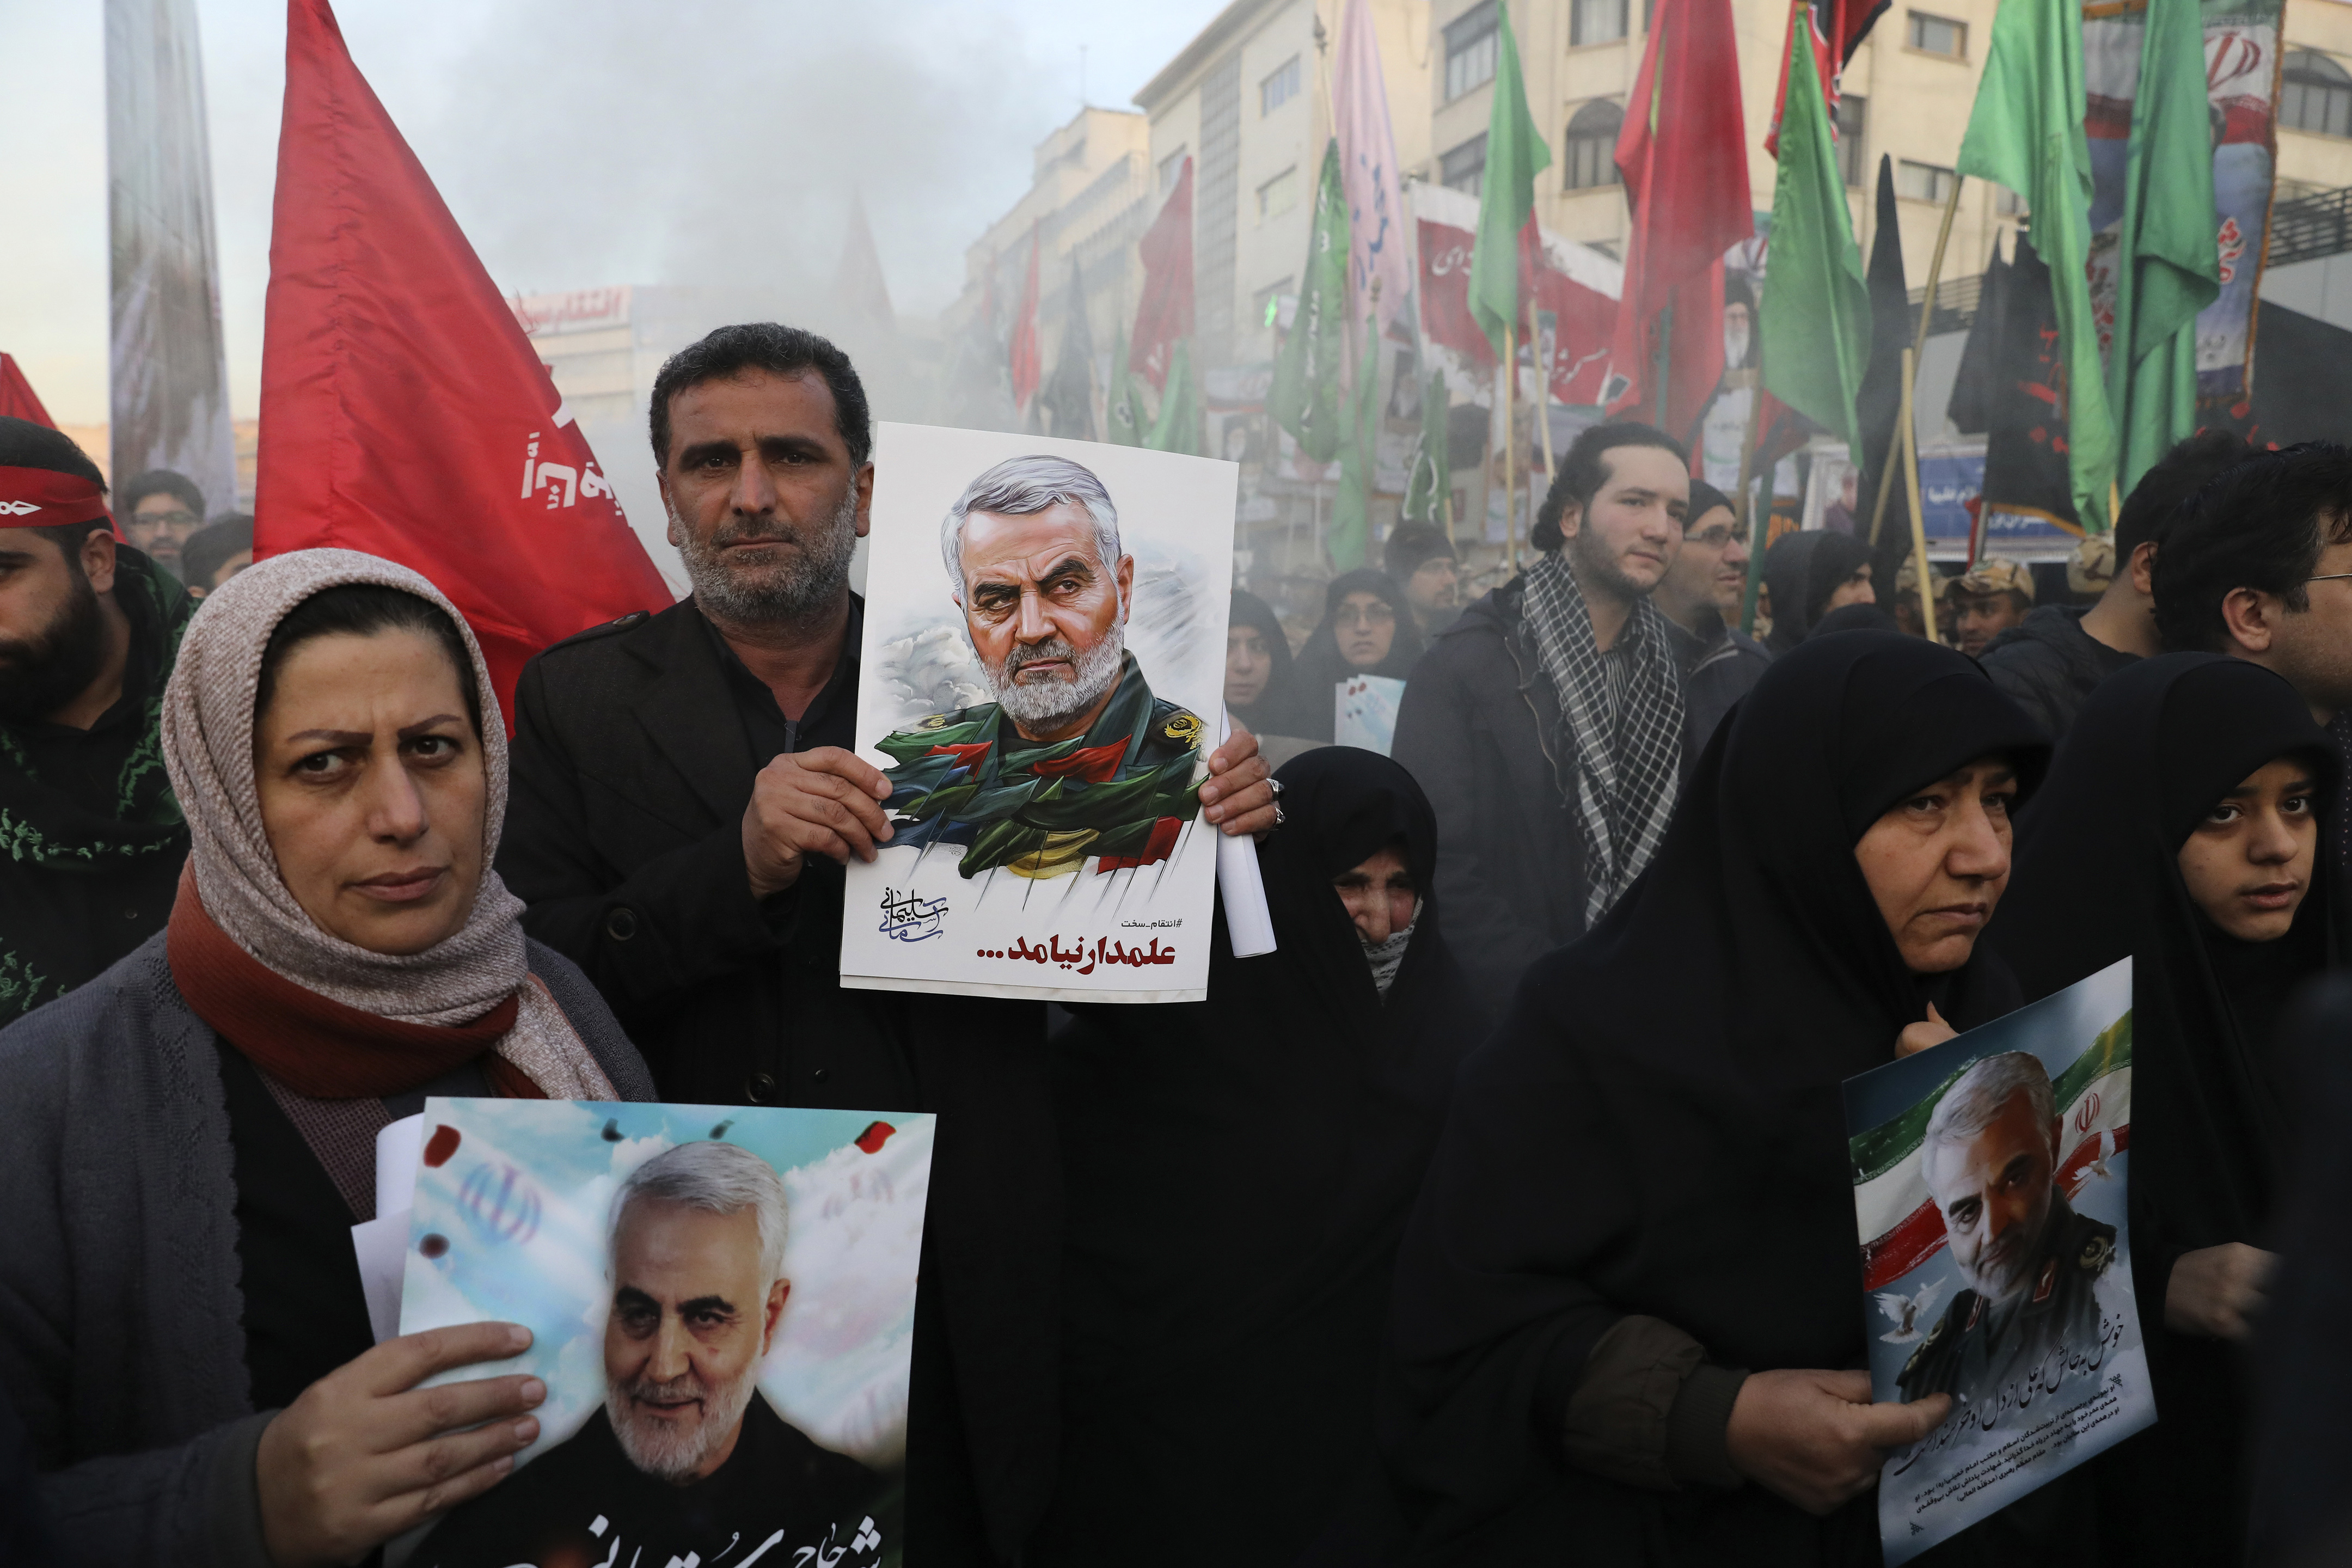 Mourners holding posters of Iranian Gen. Qassem Soleimani attend a funeral ceremony for him and his comrades, who were killed in Iraq in a U.S. drone strike on Friday, at the Enqelab-e-Eslami (Islamic Revolution) Square in Tehran, Iran, Monday, Jan. 6, 2020. (AP Photo/Ebrahim Noroozi)